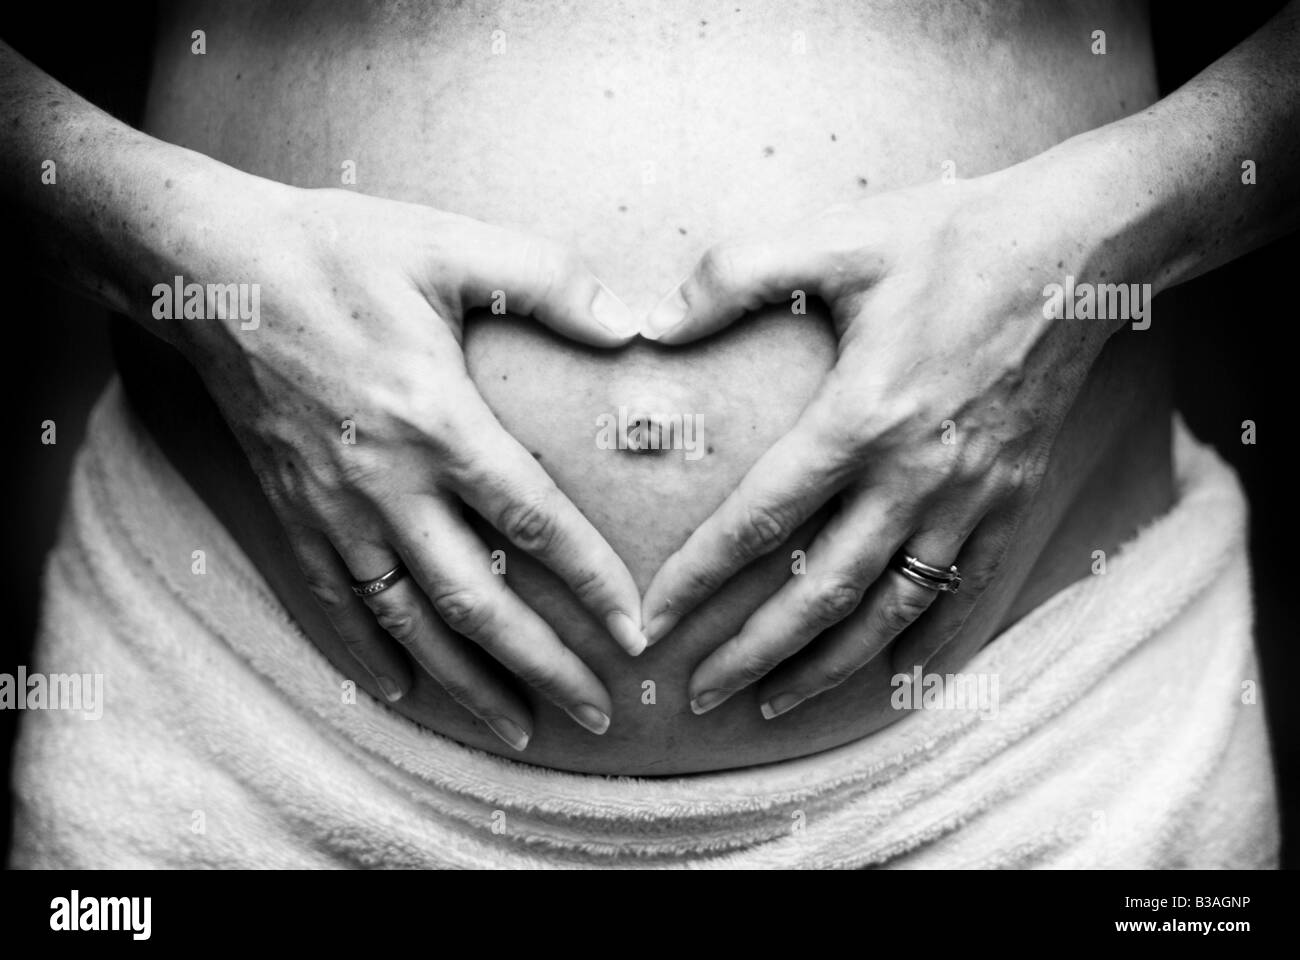 Belly button Black and White Stock Photos & Images - Alamy